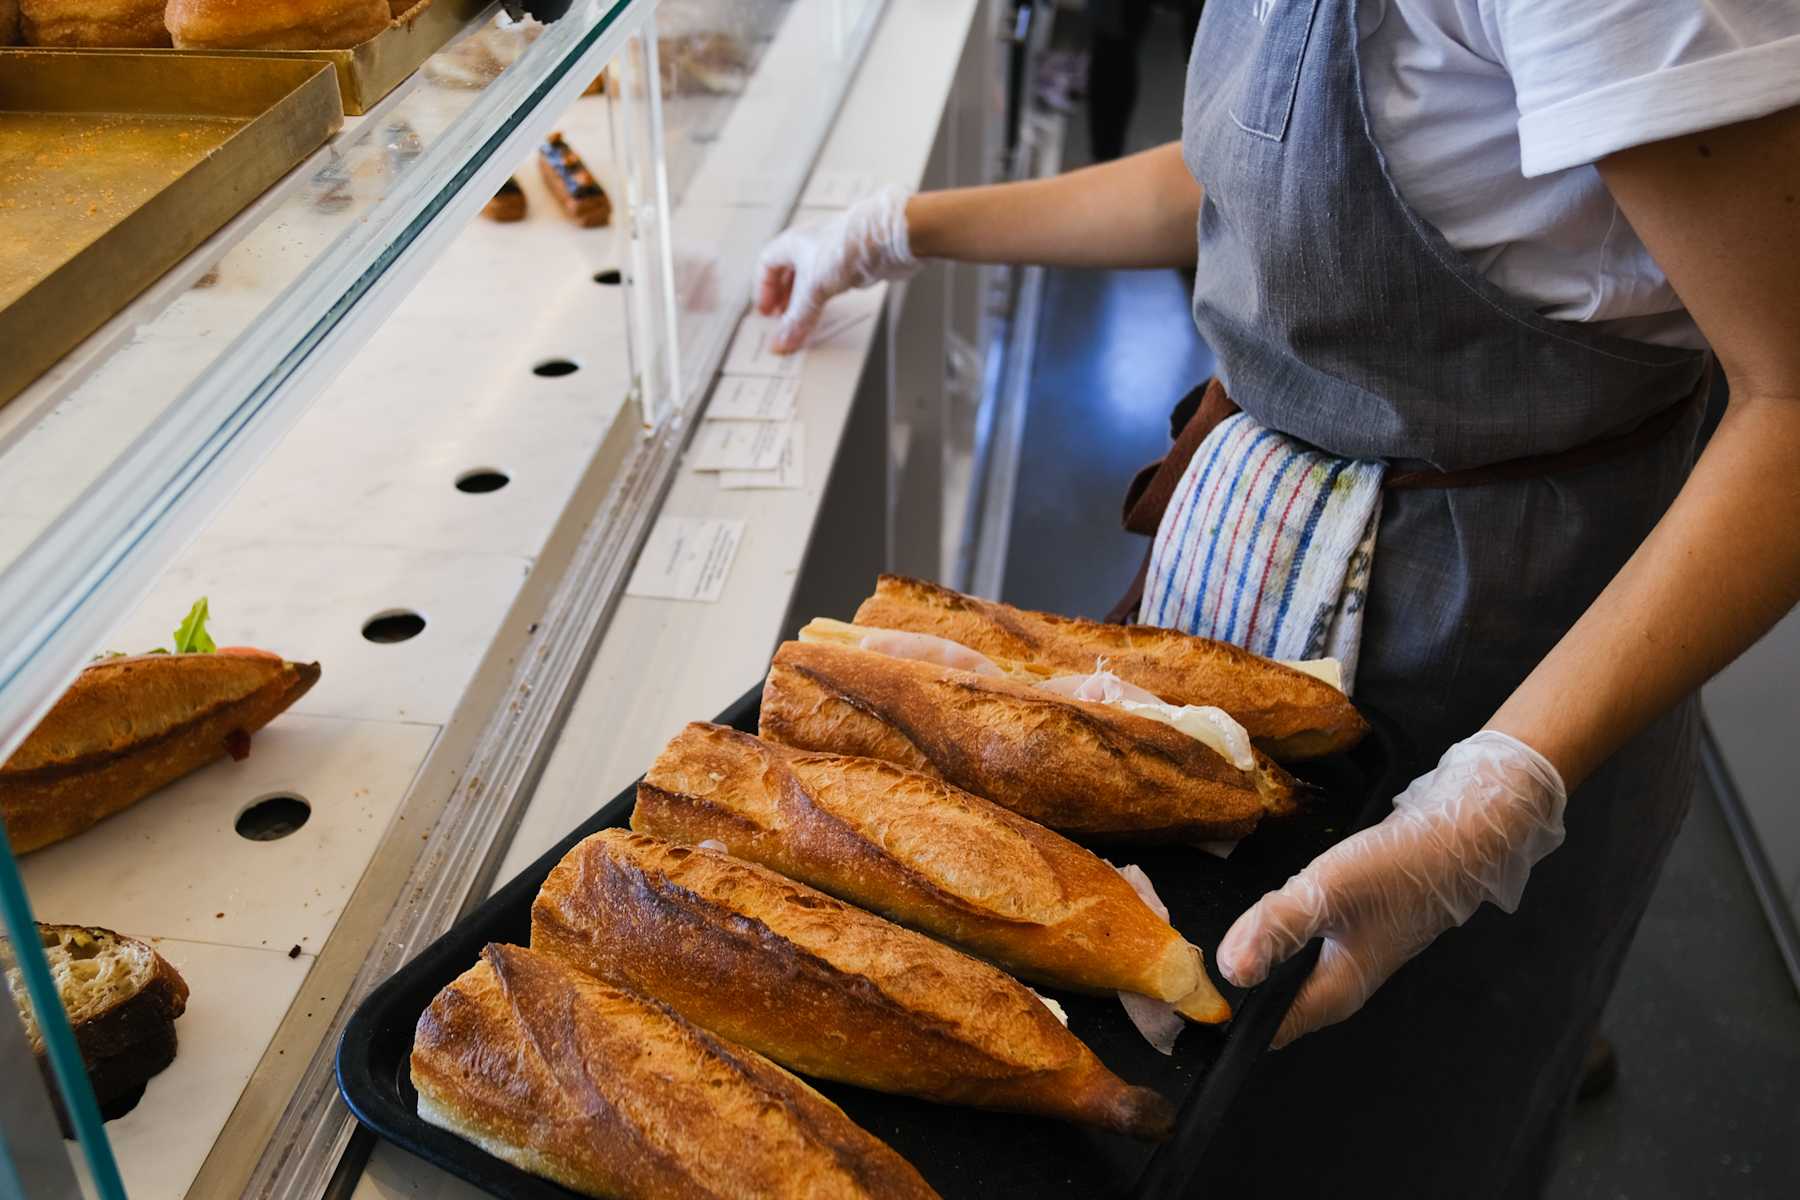 Where to find Perth’s Best Bread